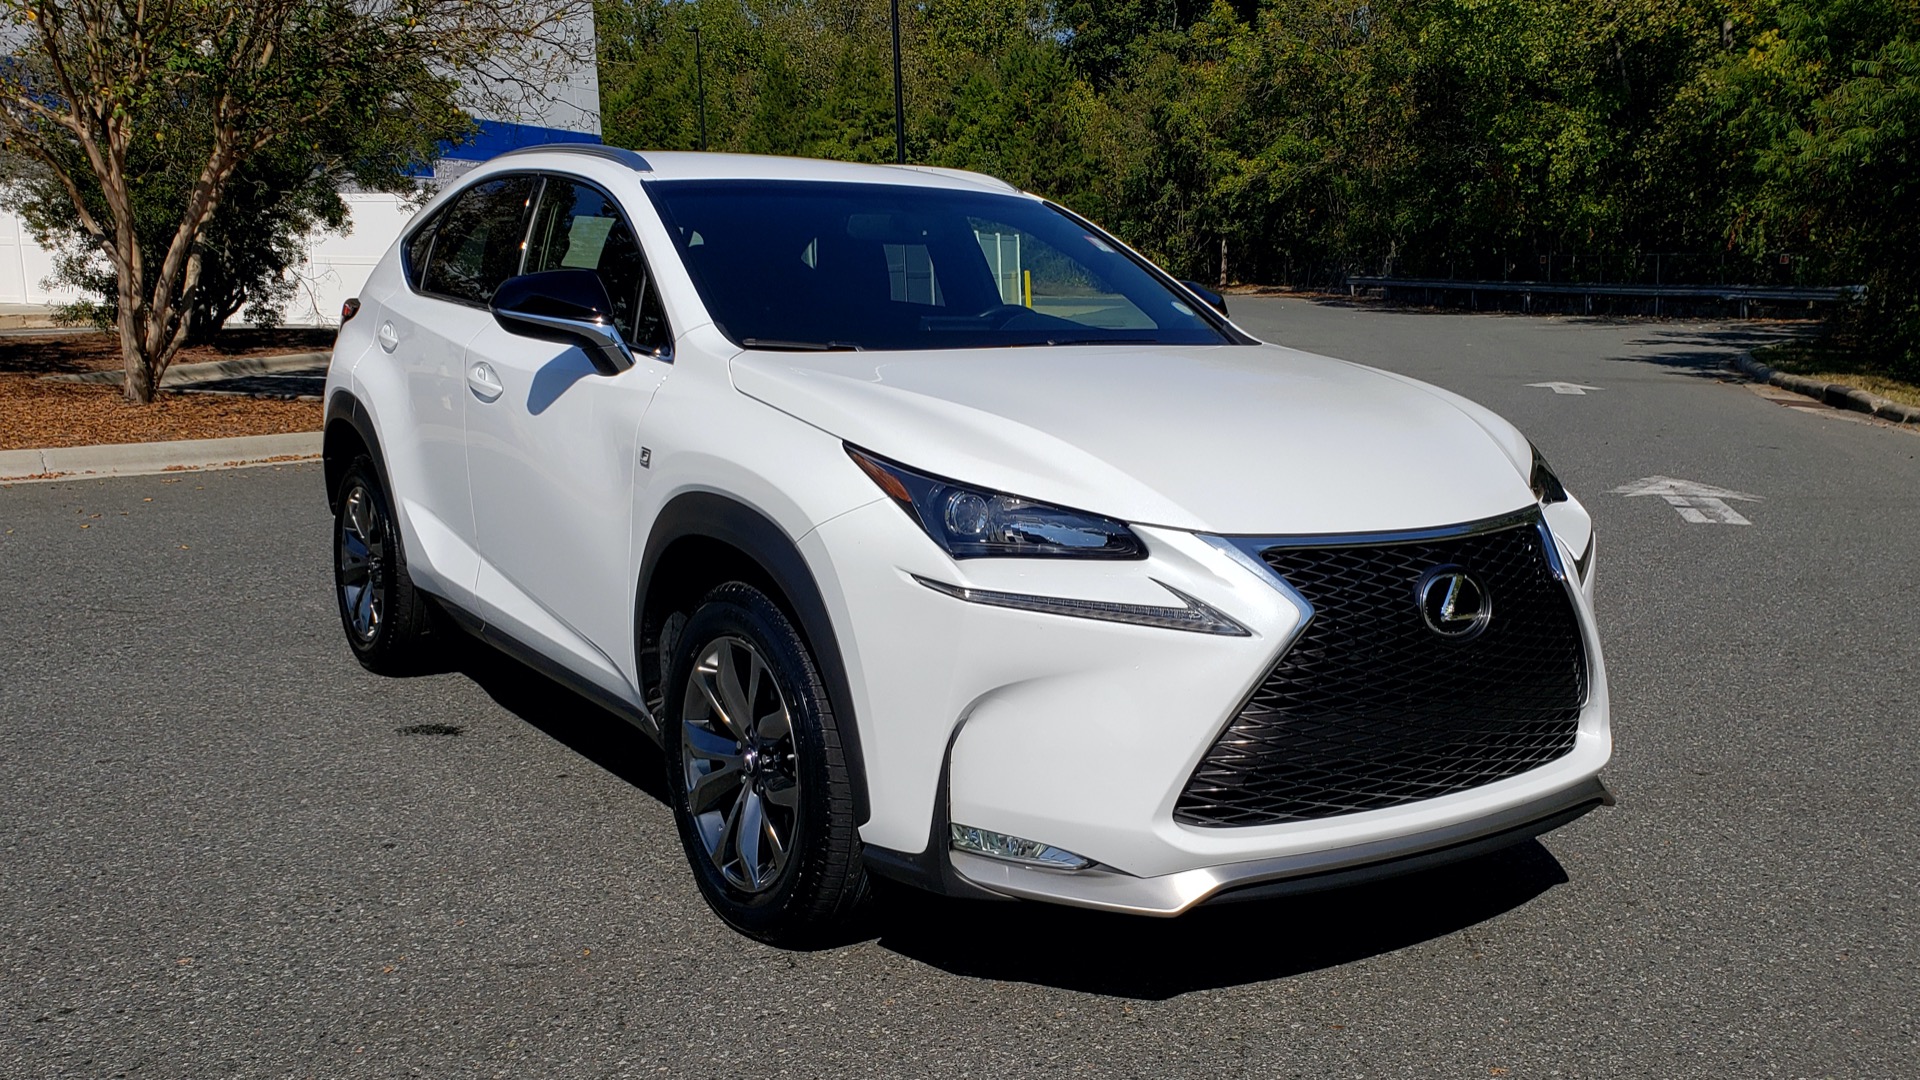 Used 2016 Lexus NX 200t F-SPORT / BACK-UP CAMERA / 18 INCH WHEELS for sale Sold at Formula Imports in Charlotte NC 28227 10